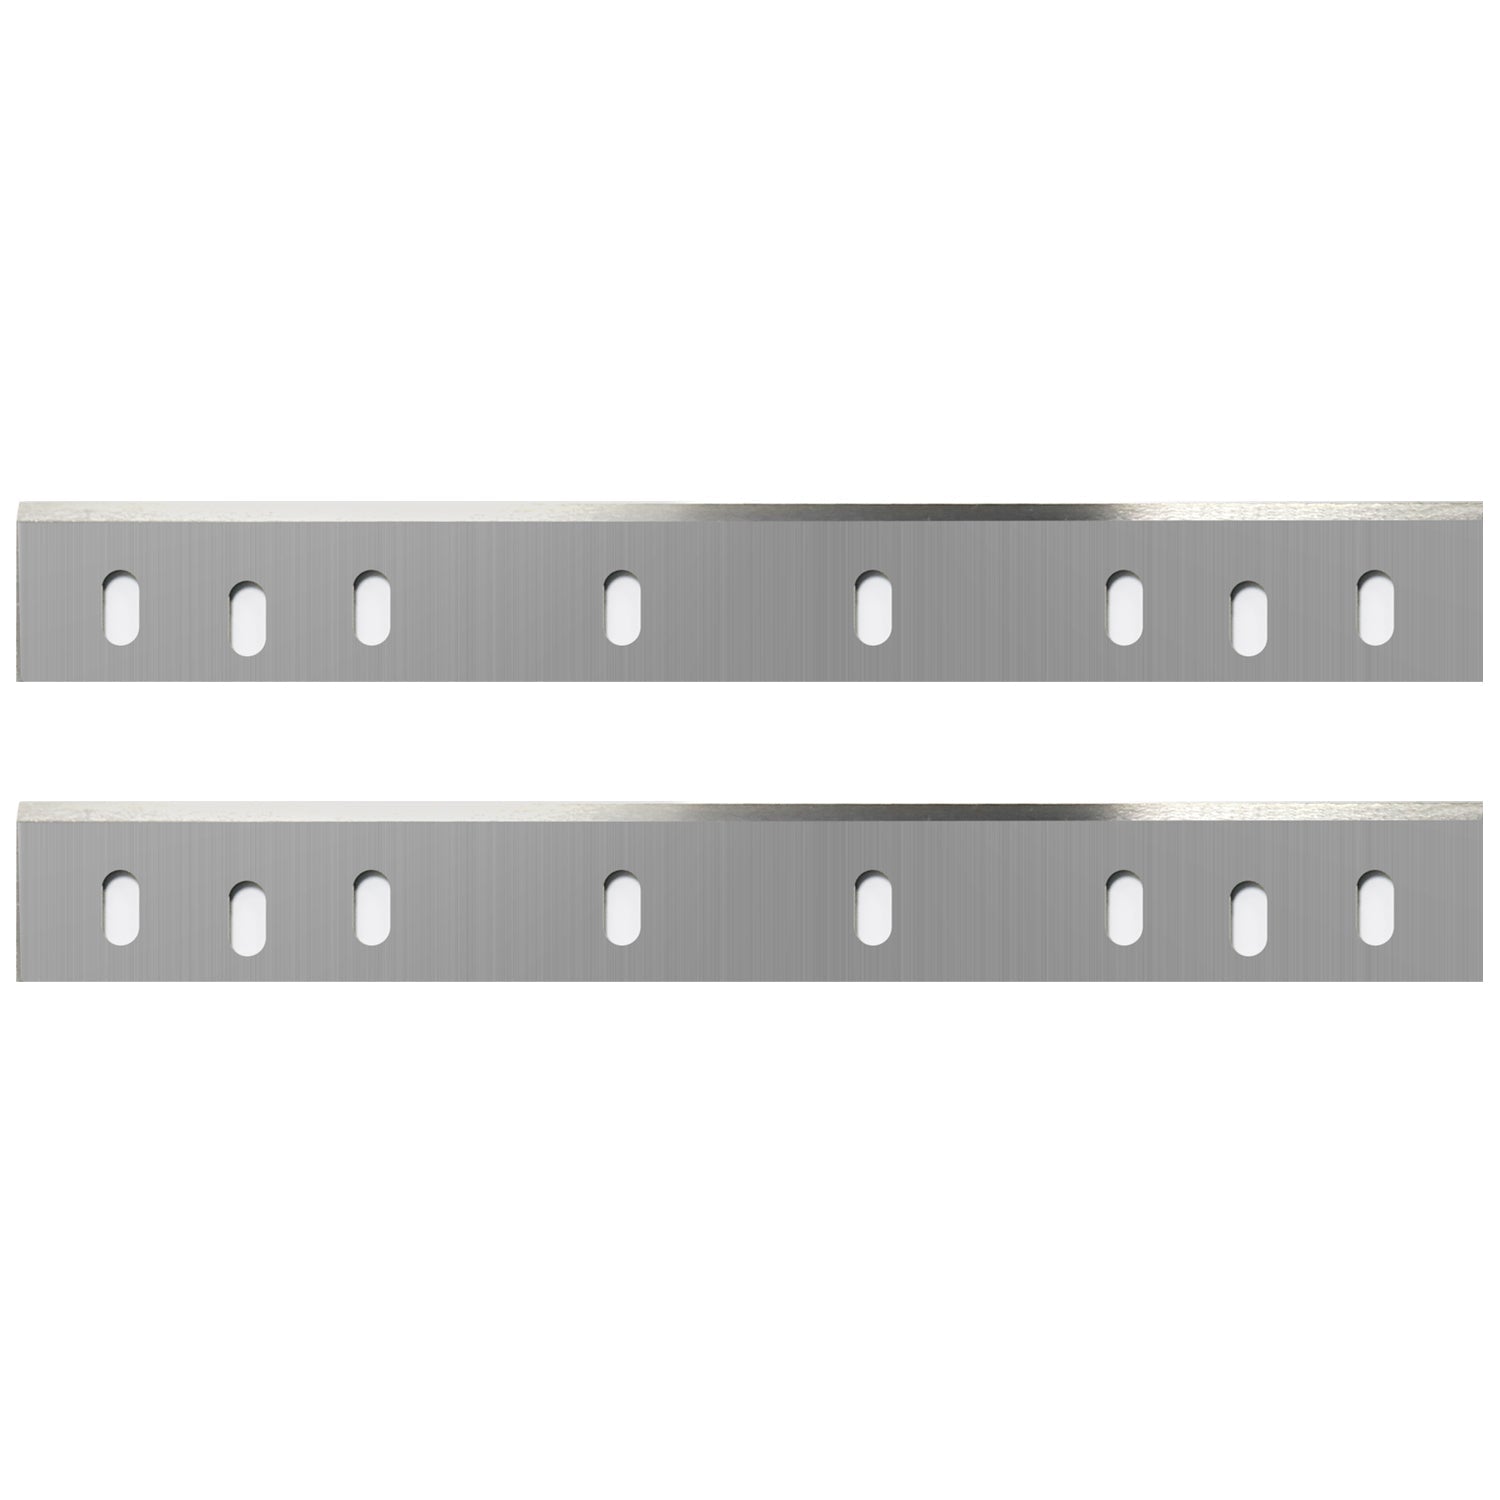 10-7/20 Inch HSS Planer Blades Replacement Knives Cutters for  Ryobi AP-10 Thickness Planer, Set of 2, 263x32x3mm Yeptooling